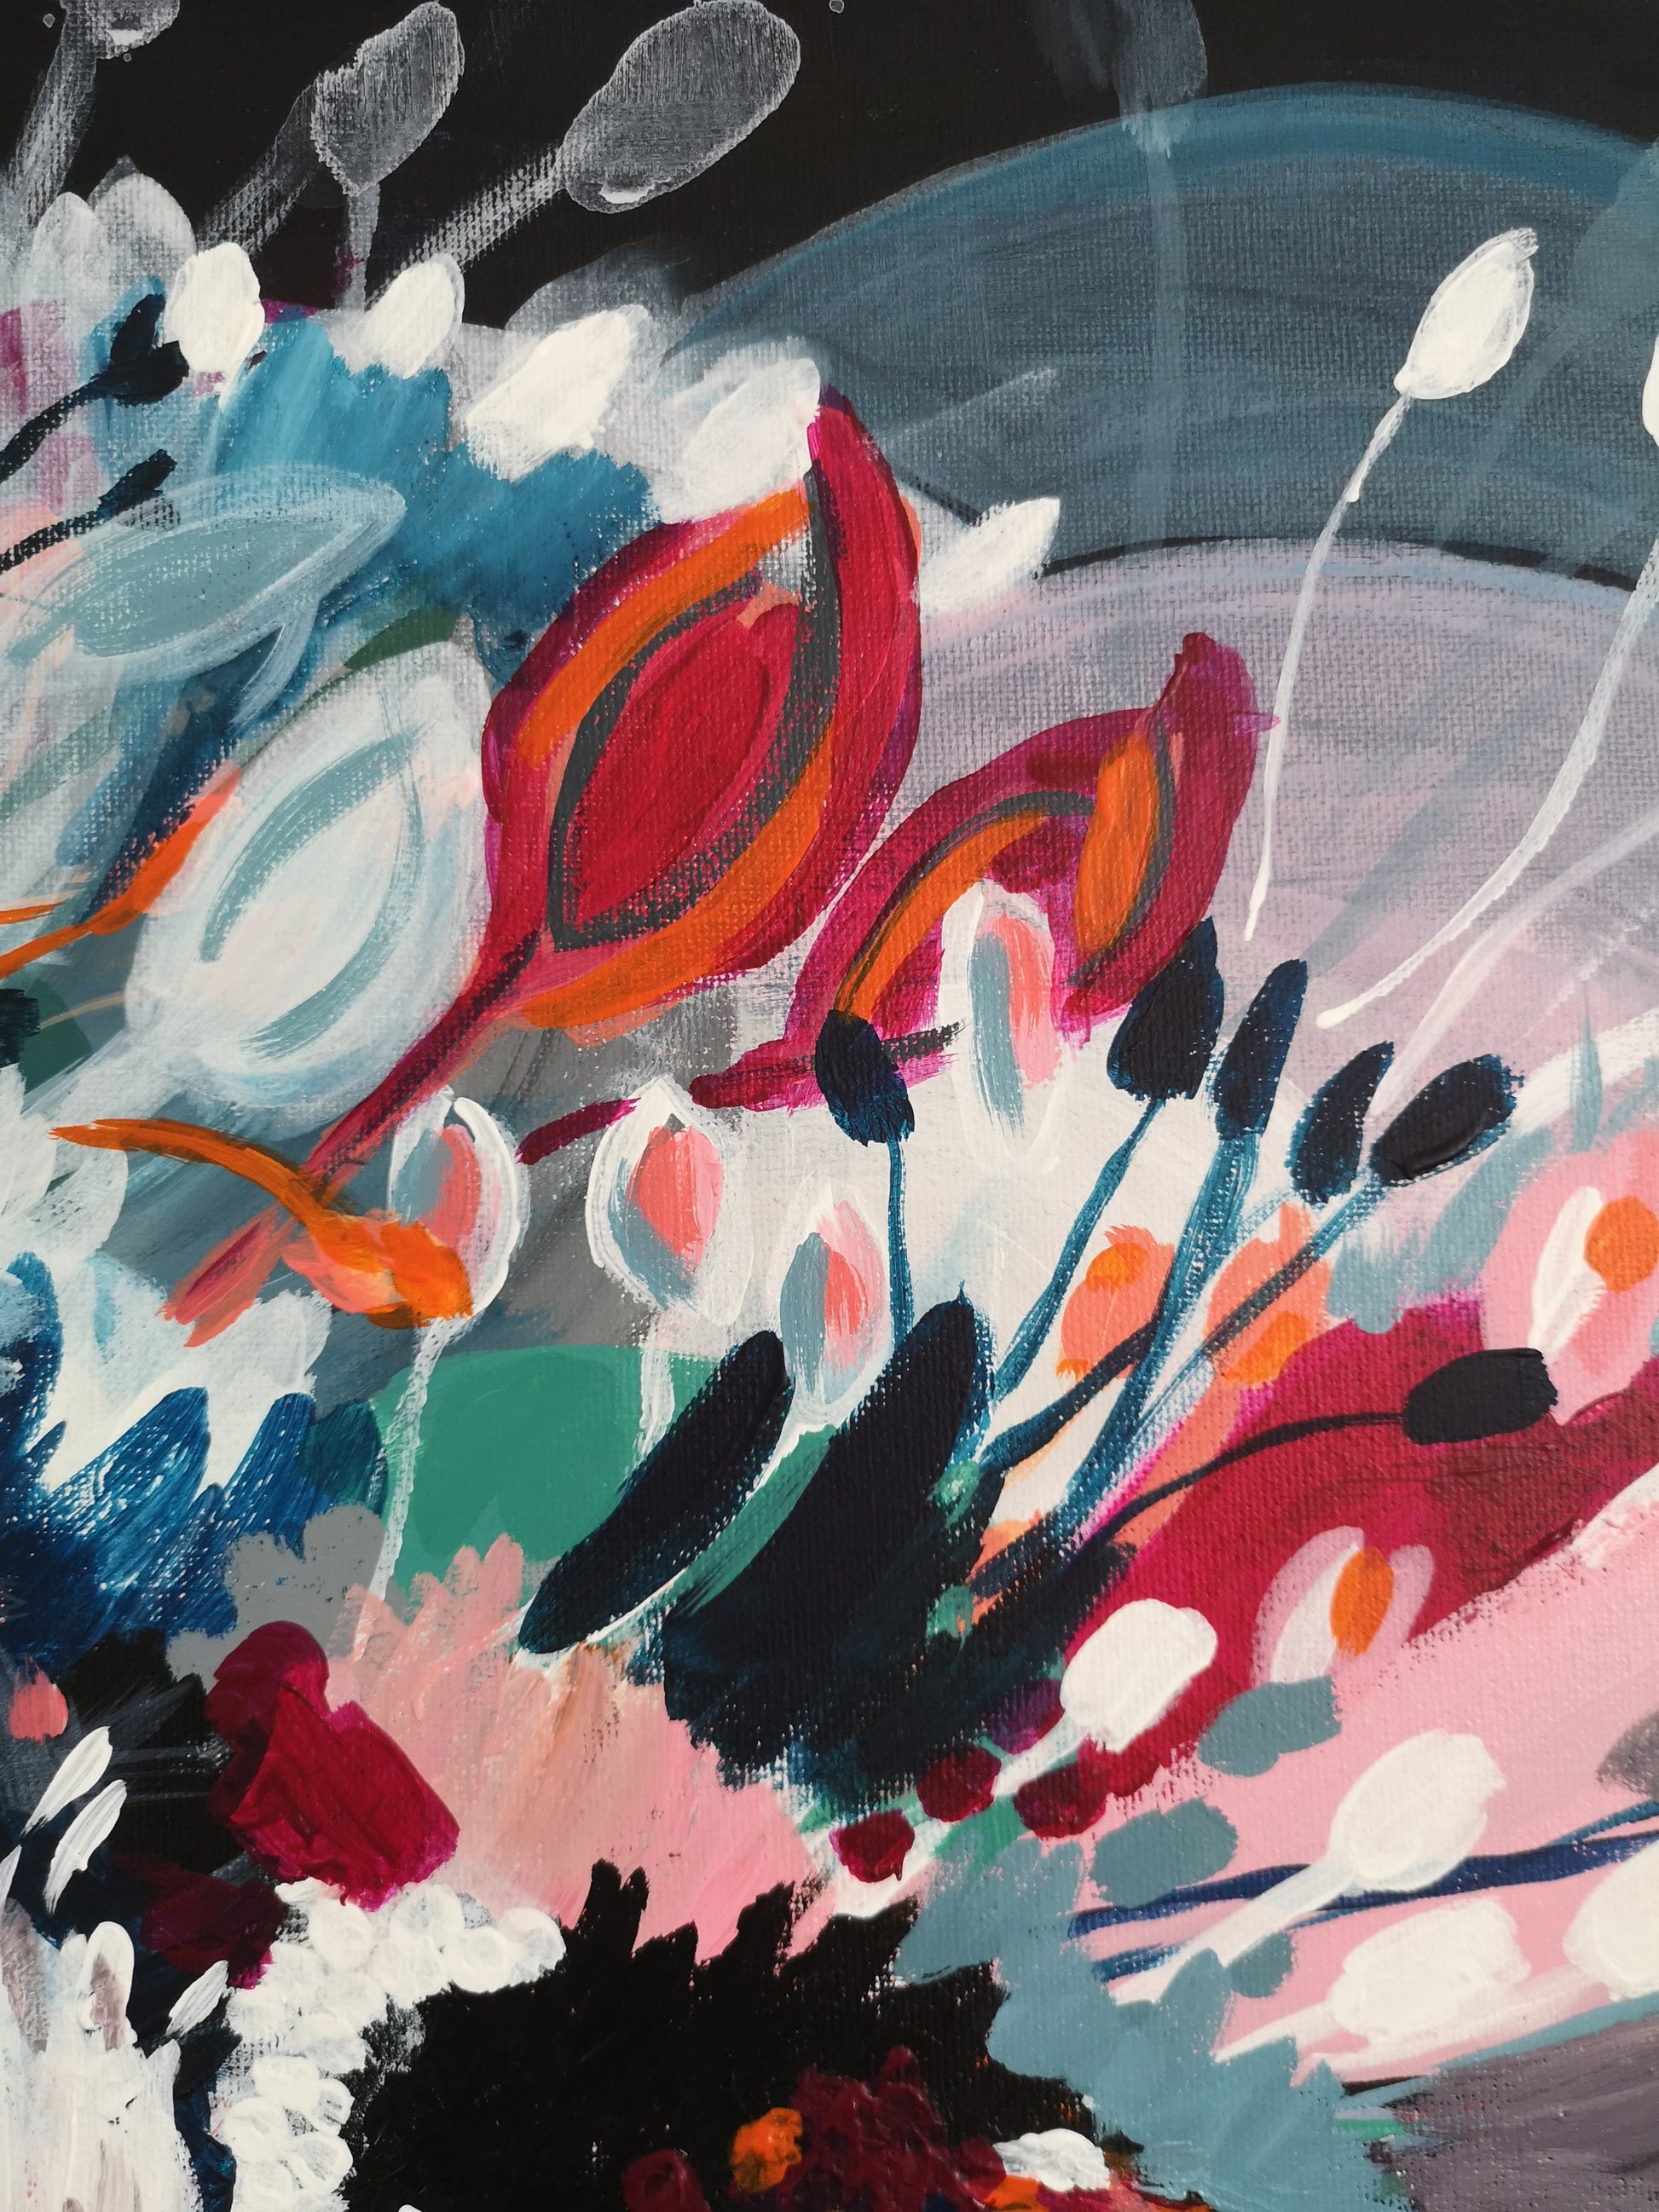 Close up of Hibiscus Burst Painting by Judy Century, featuring flower buds in magenta, orange, white and grey and colourful brushstrokes.